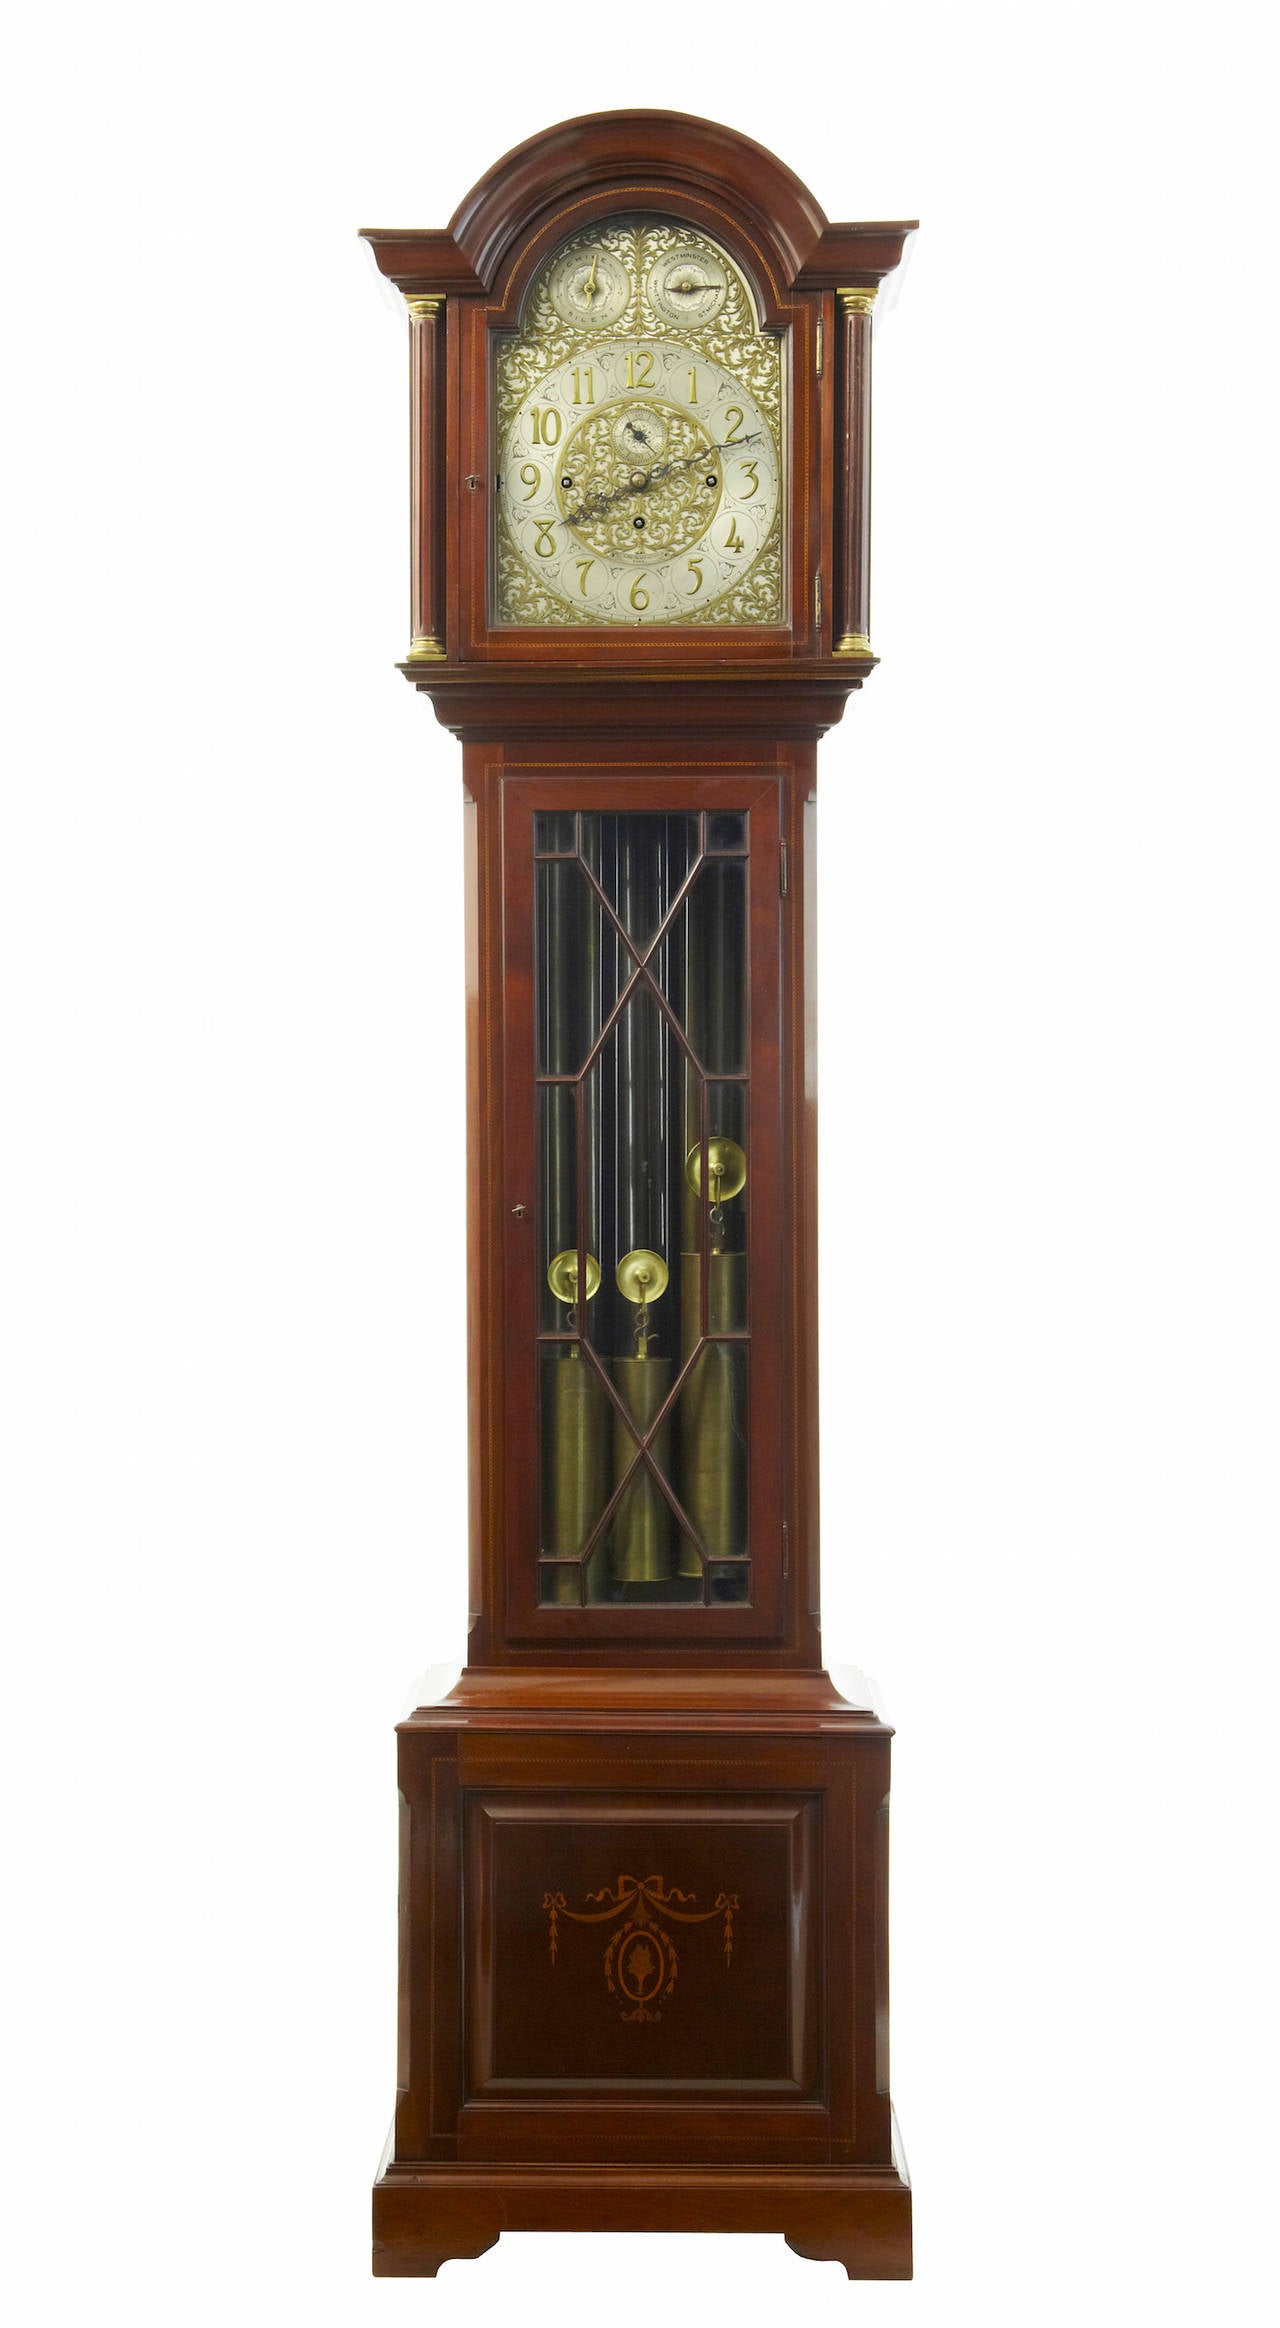 Longcase clock circa 1895.Retailed by kirby beard and co ltd paris, stamped on face.Fully restored movement.Fretwork to hood sides.9 tubular gongs playing westminster,whittingham and st micheal chimes.Astral glazed door to the front exposes the